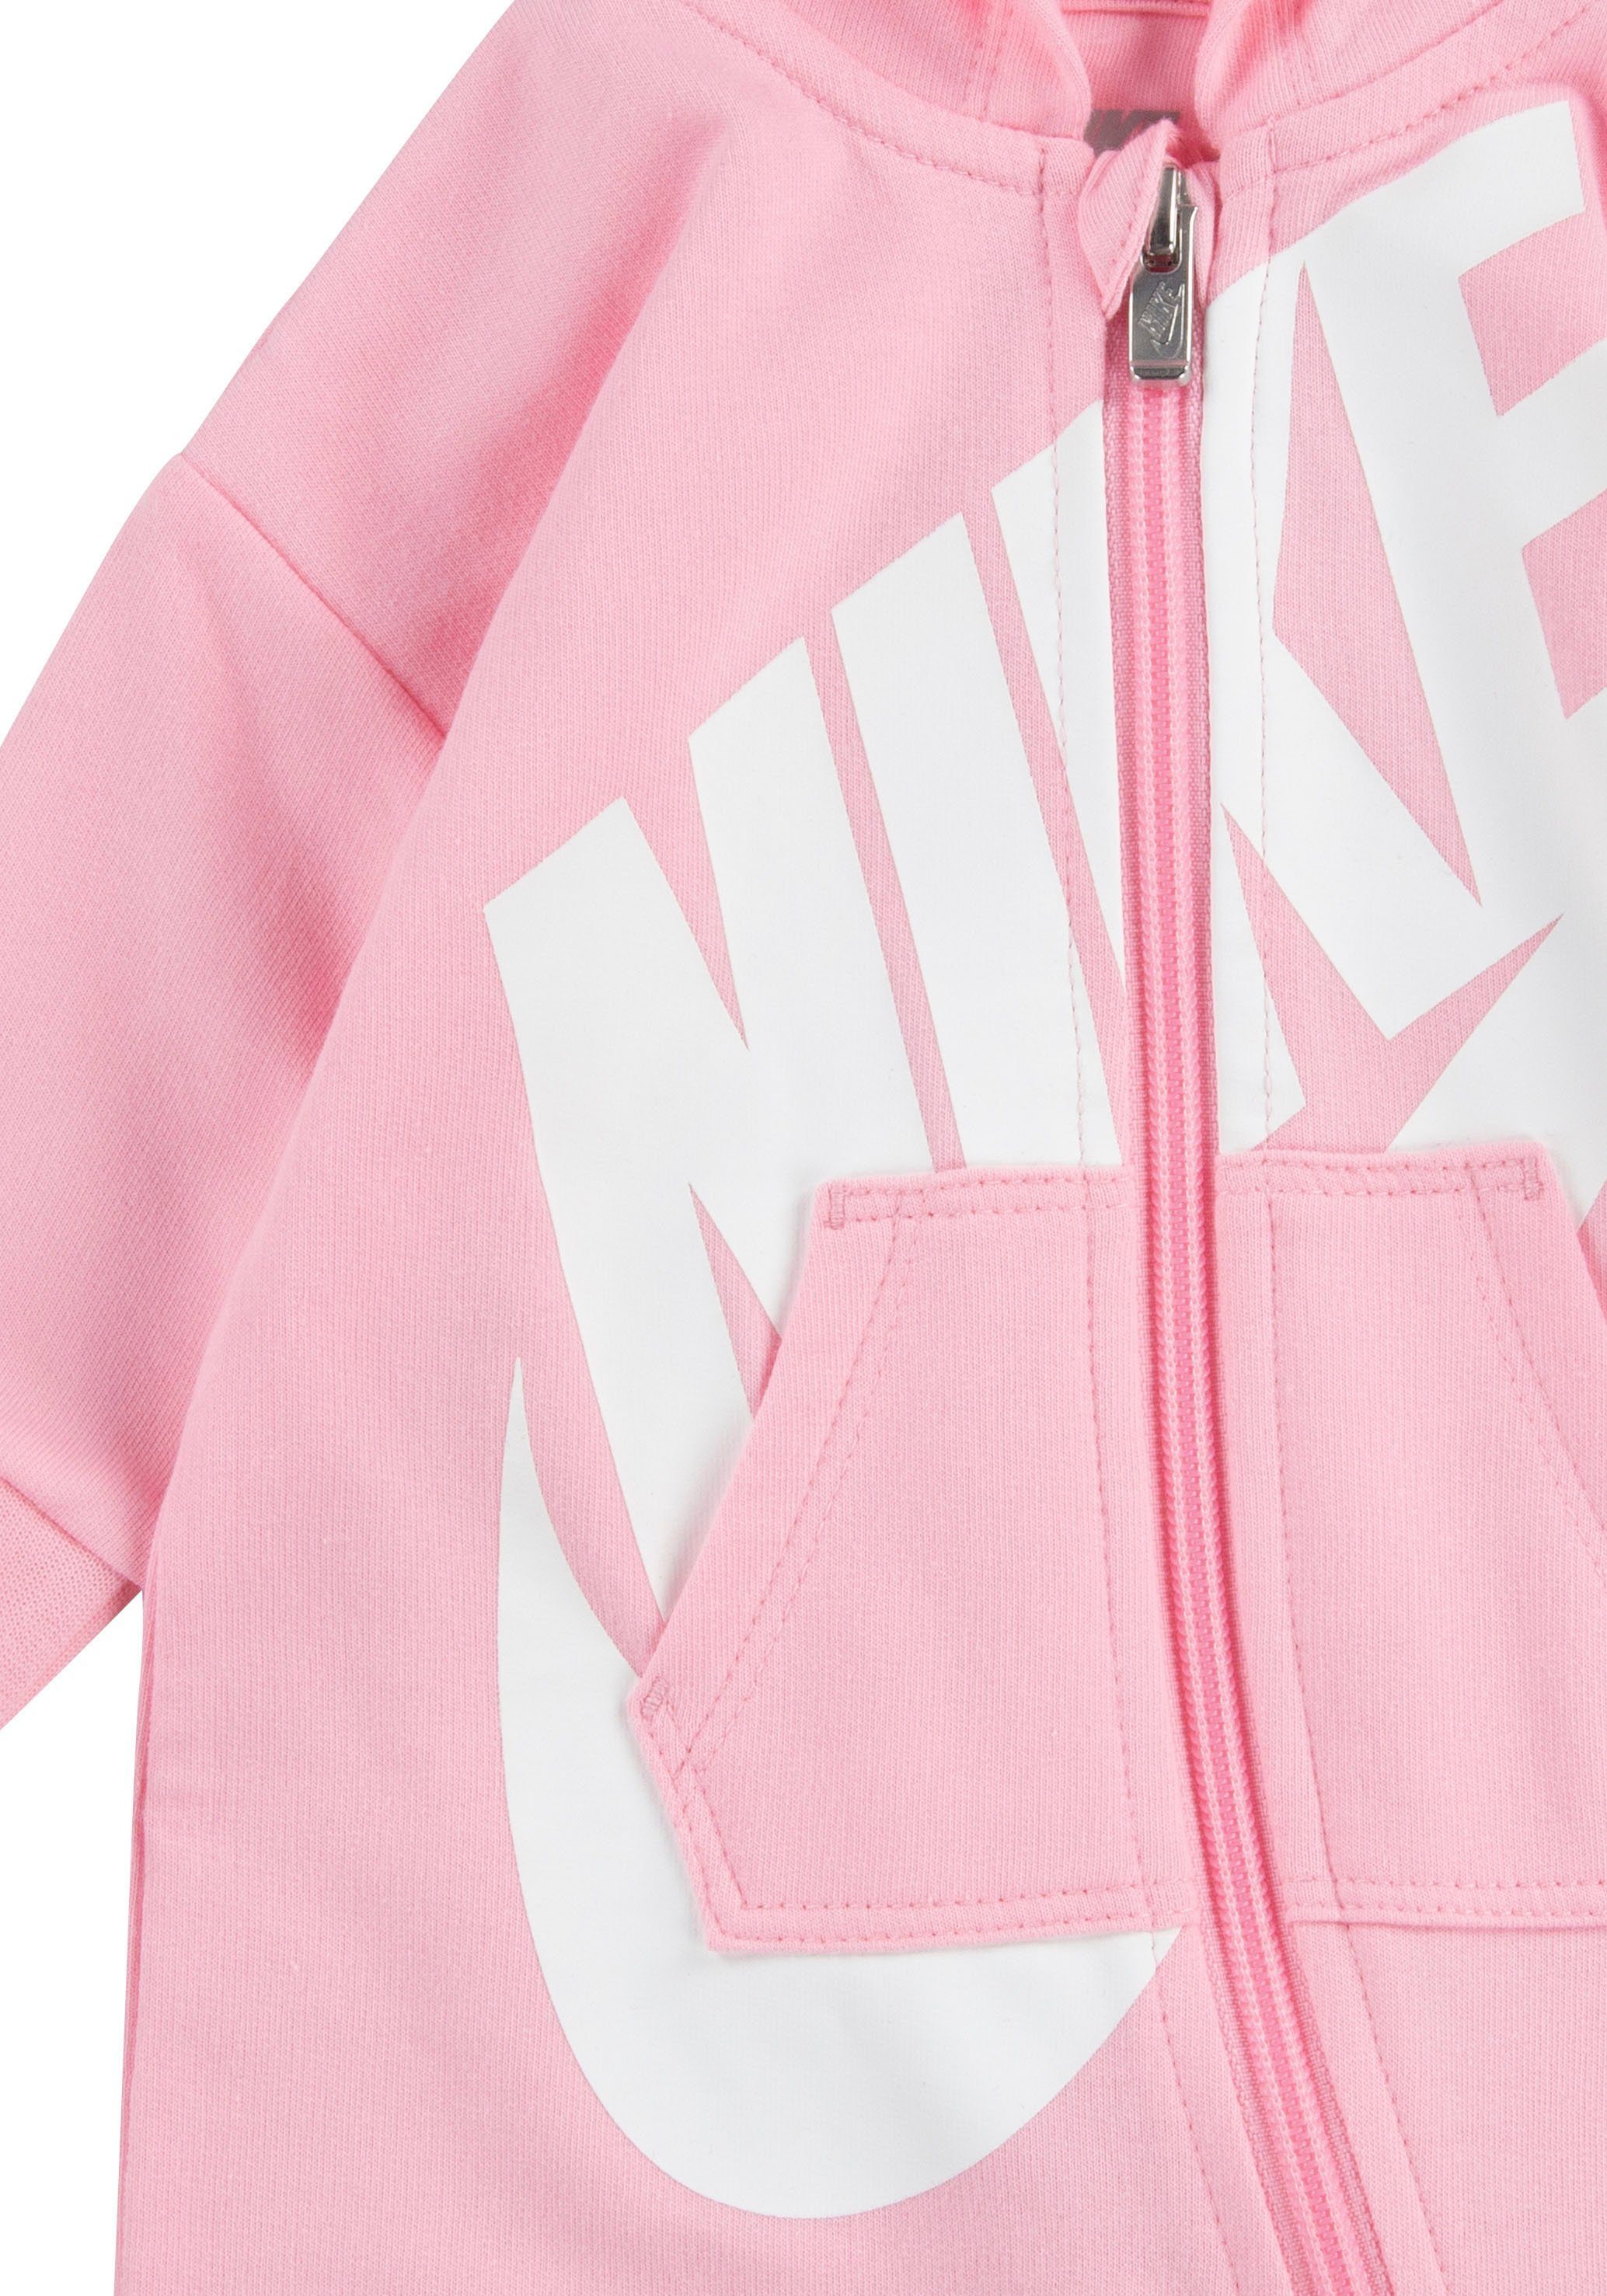 NKN Strampler COVERALL rosa-weiß Nike DAY Sportswear ALL PLAY